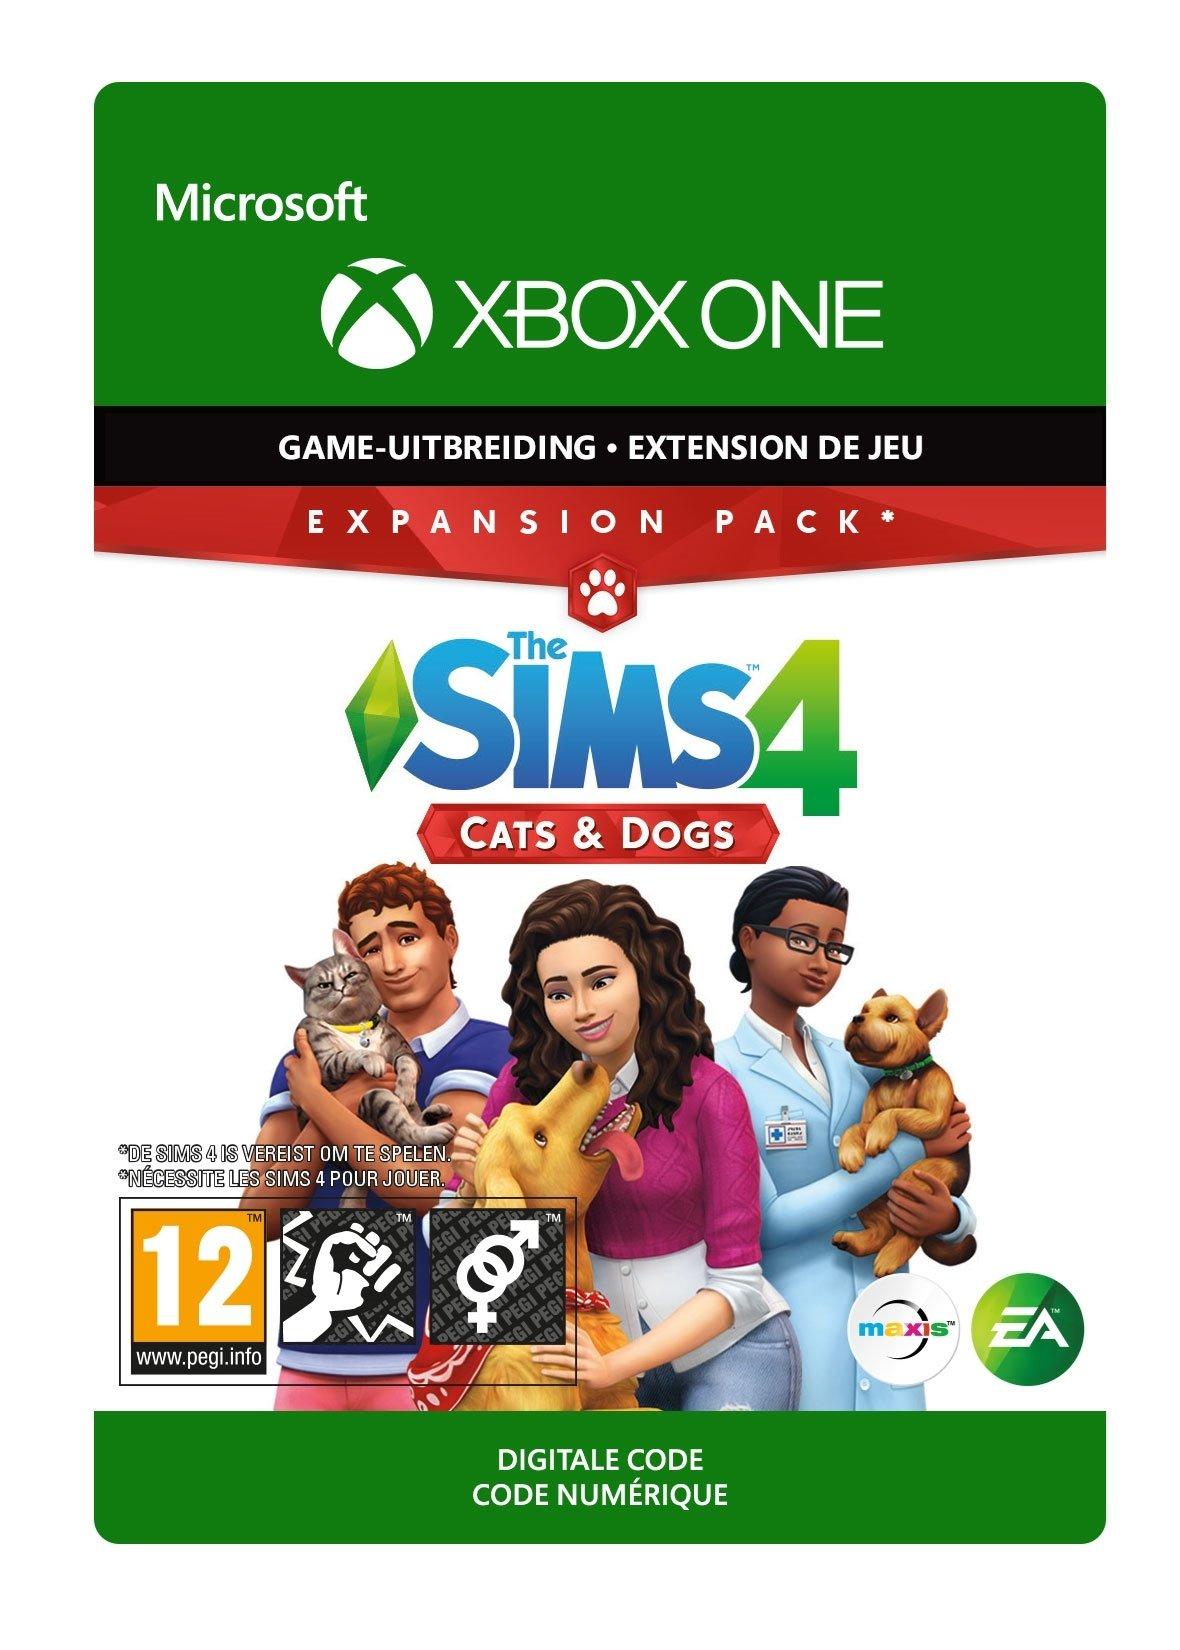 The Sims 4 Cats & Dogs - Xbox One - Add-on | 7D4-00254 (a46786c6-5887-024b-83e3-1cabd9f154be)